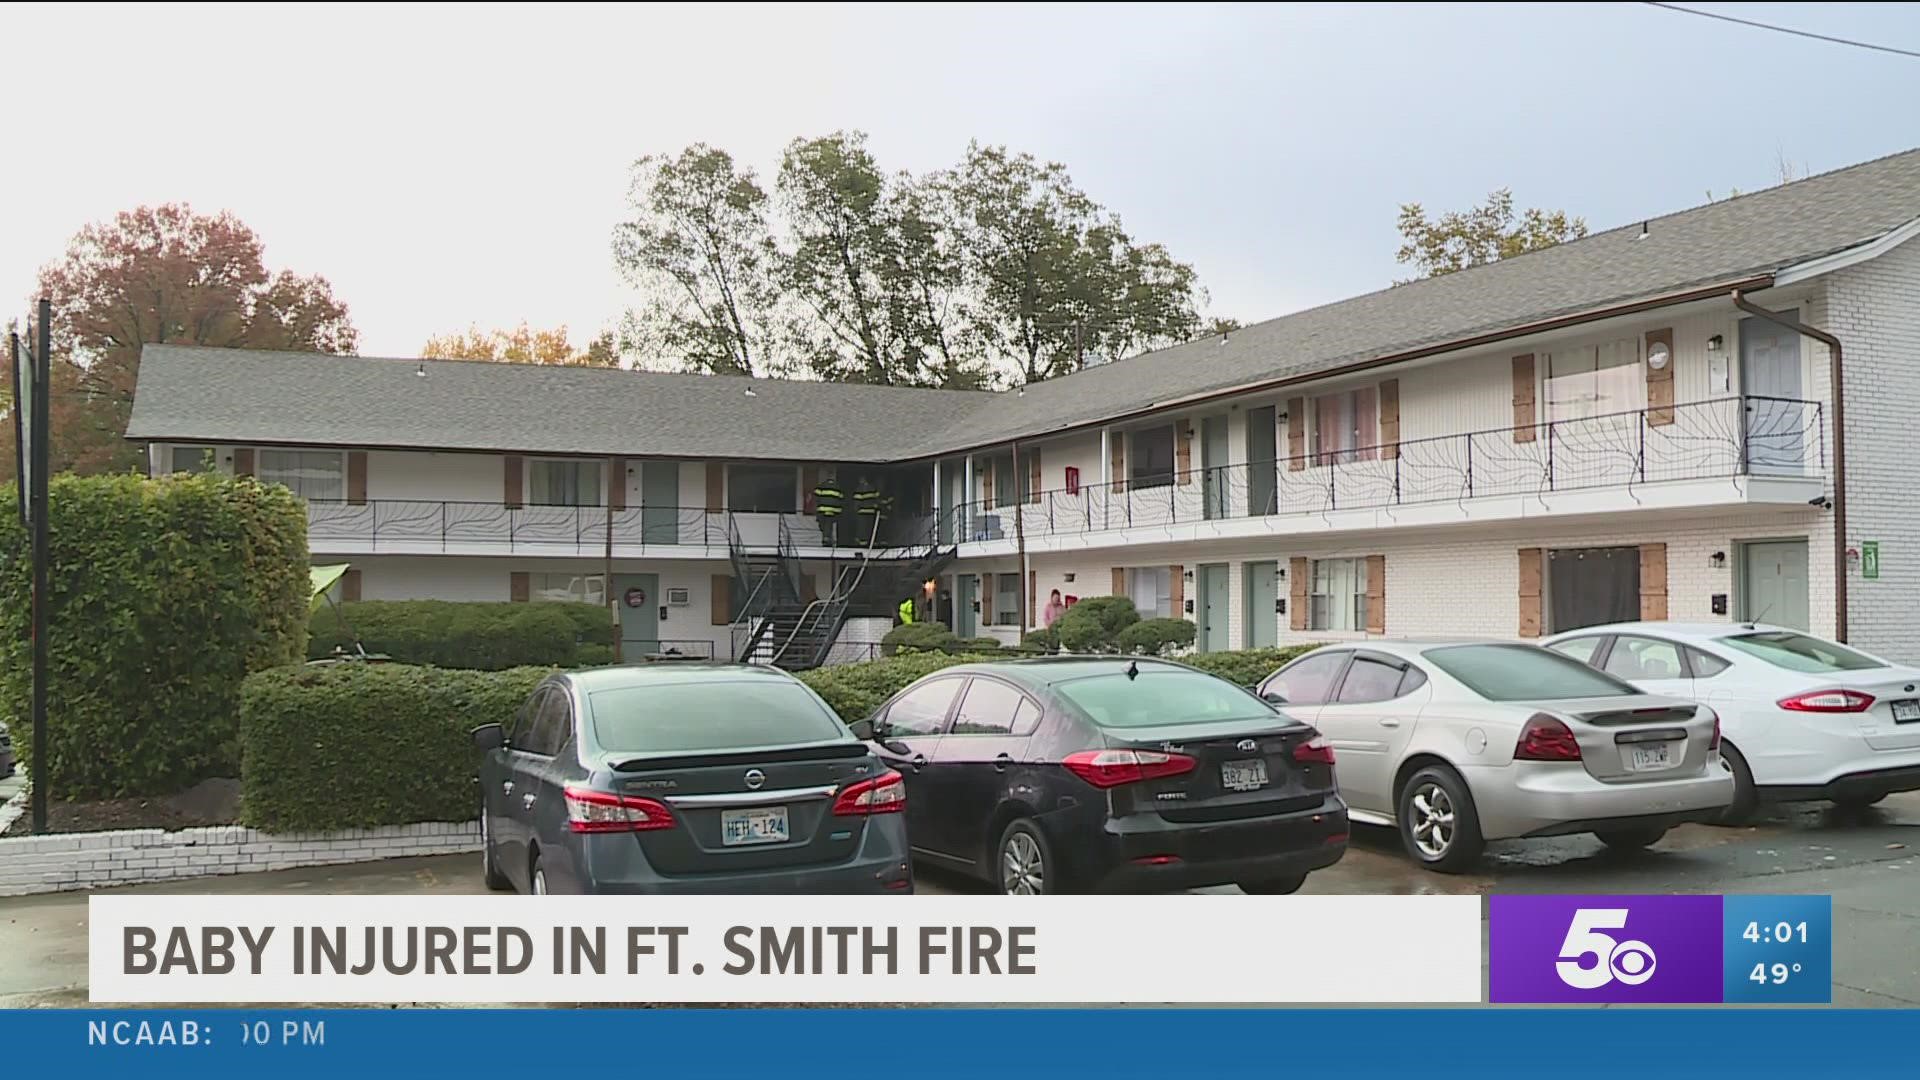 According to Fort Smith Fire Chief Philip Christensen, this is the fifth fire at The Grove Apartments in the past two weeks.